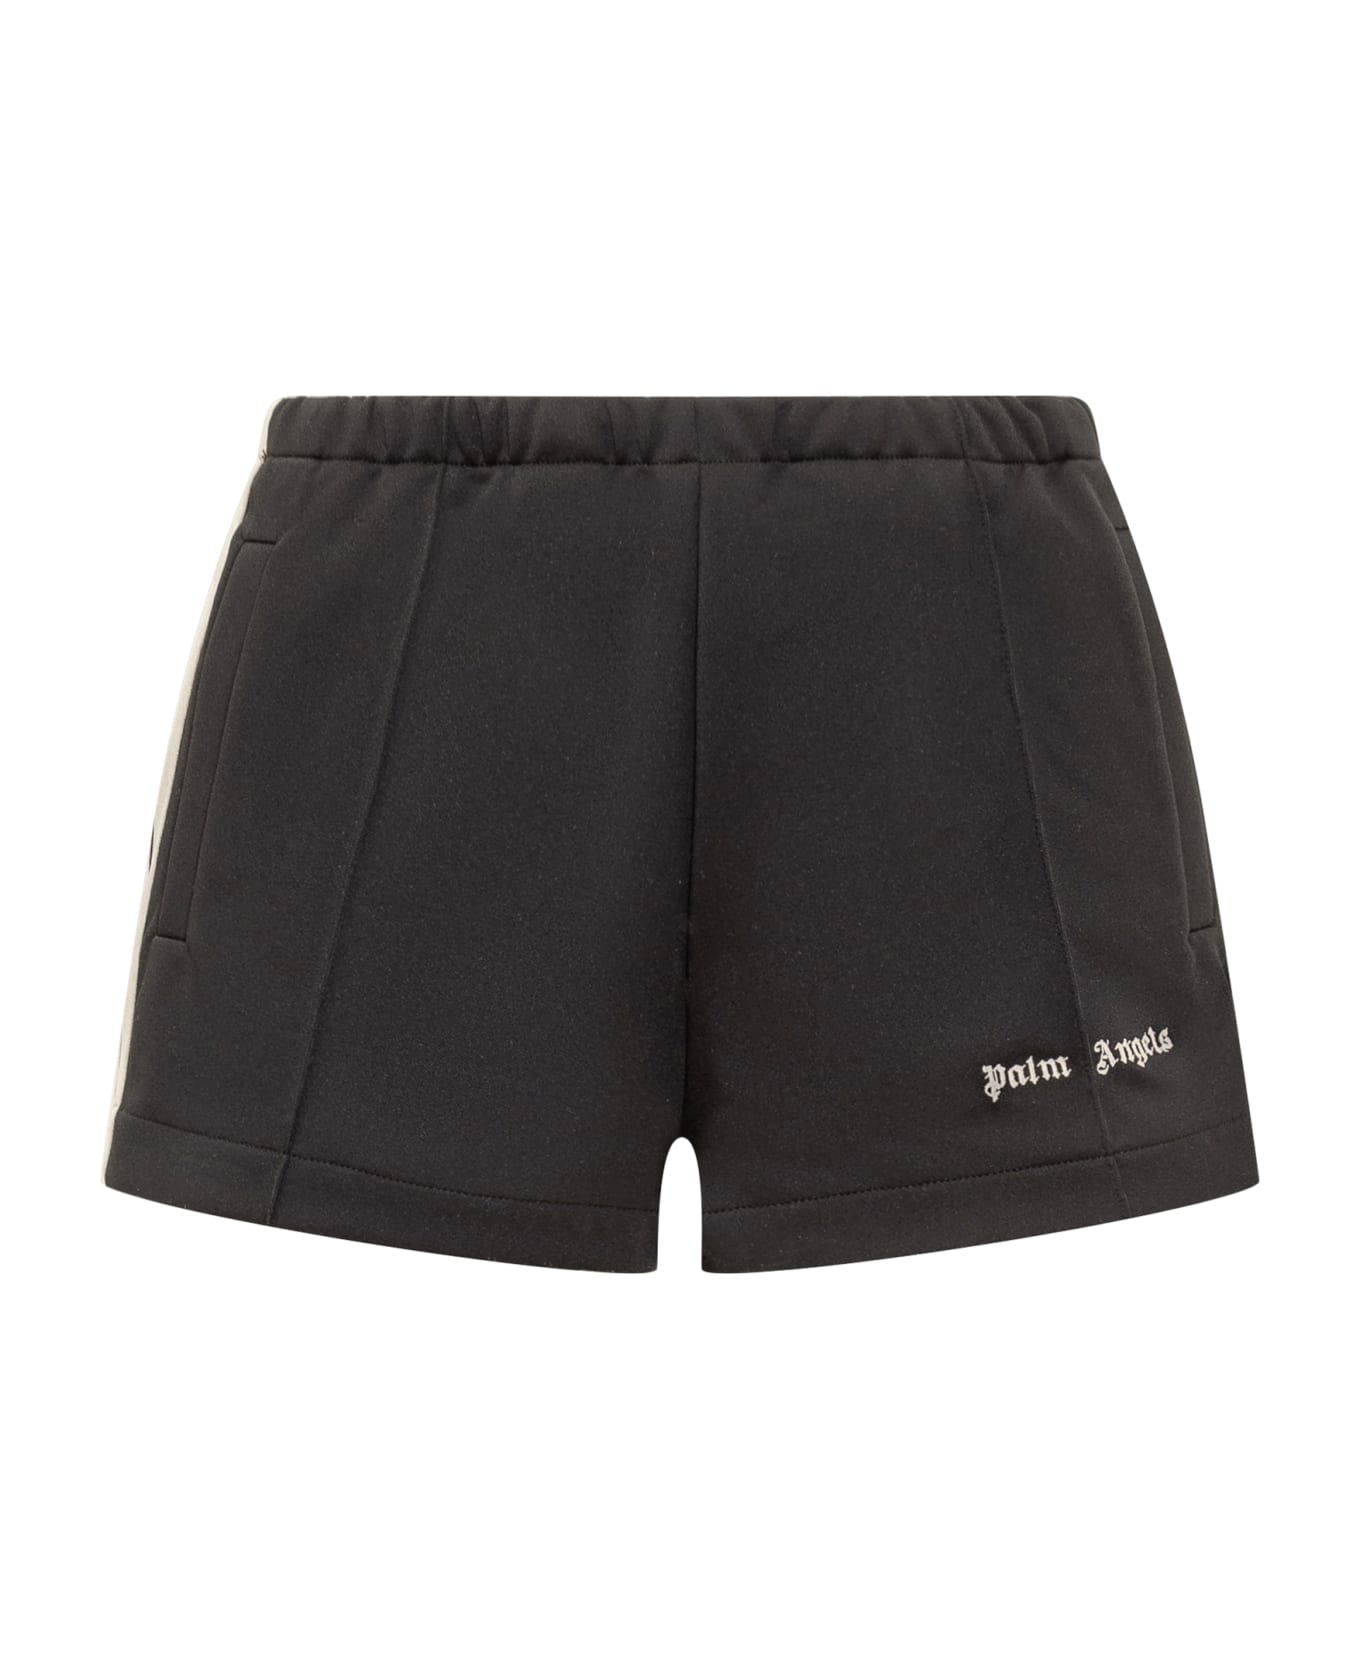 Palm Angels Black Polyester Sporty Shorts - BLACK OFF WHITE